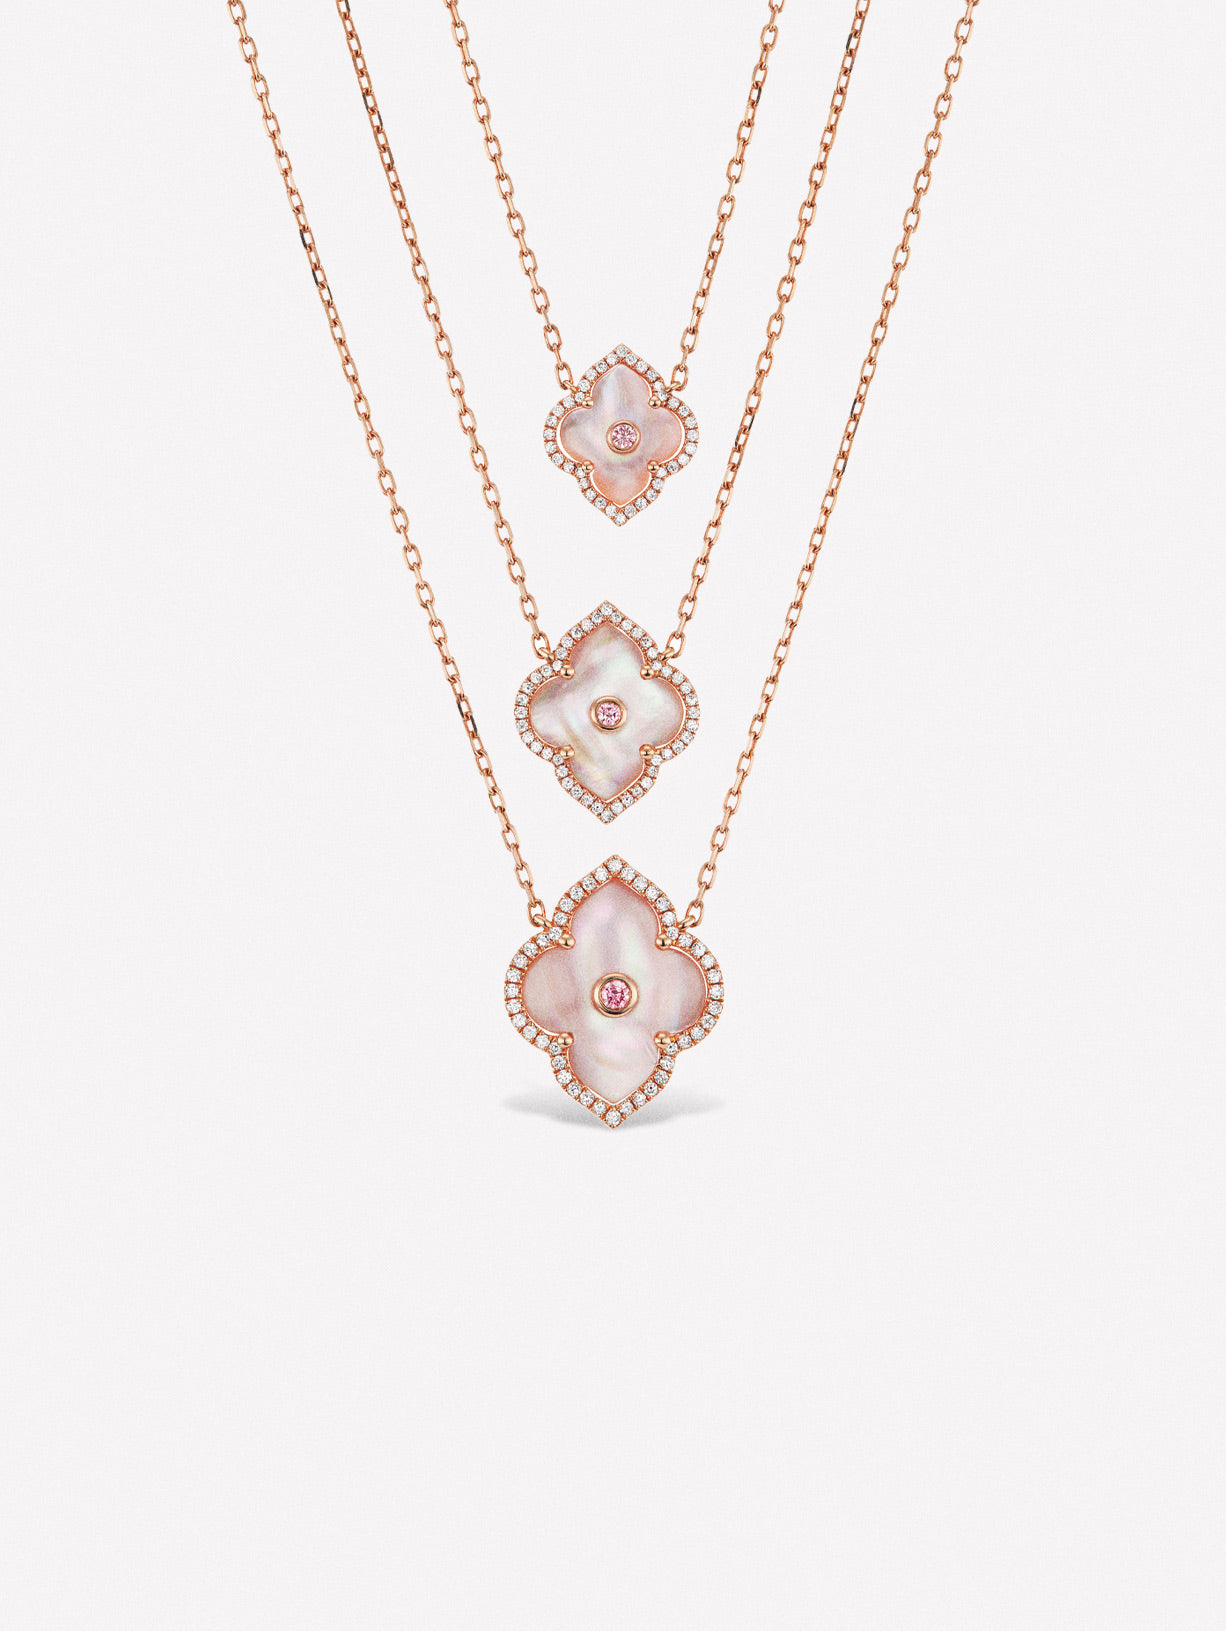 Argyle Pink™ Diamond and Mother of Pearl Large Necklace - Pink Diamonds, J FINE - J Fine, Necklaces - Pink Diamond Jewelry, argyle-pink™-diamond-and-mother-of-pearl-large-necklace-by-j-fi